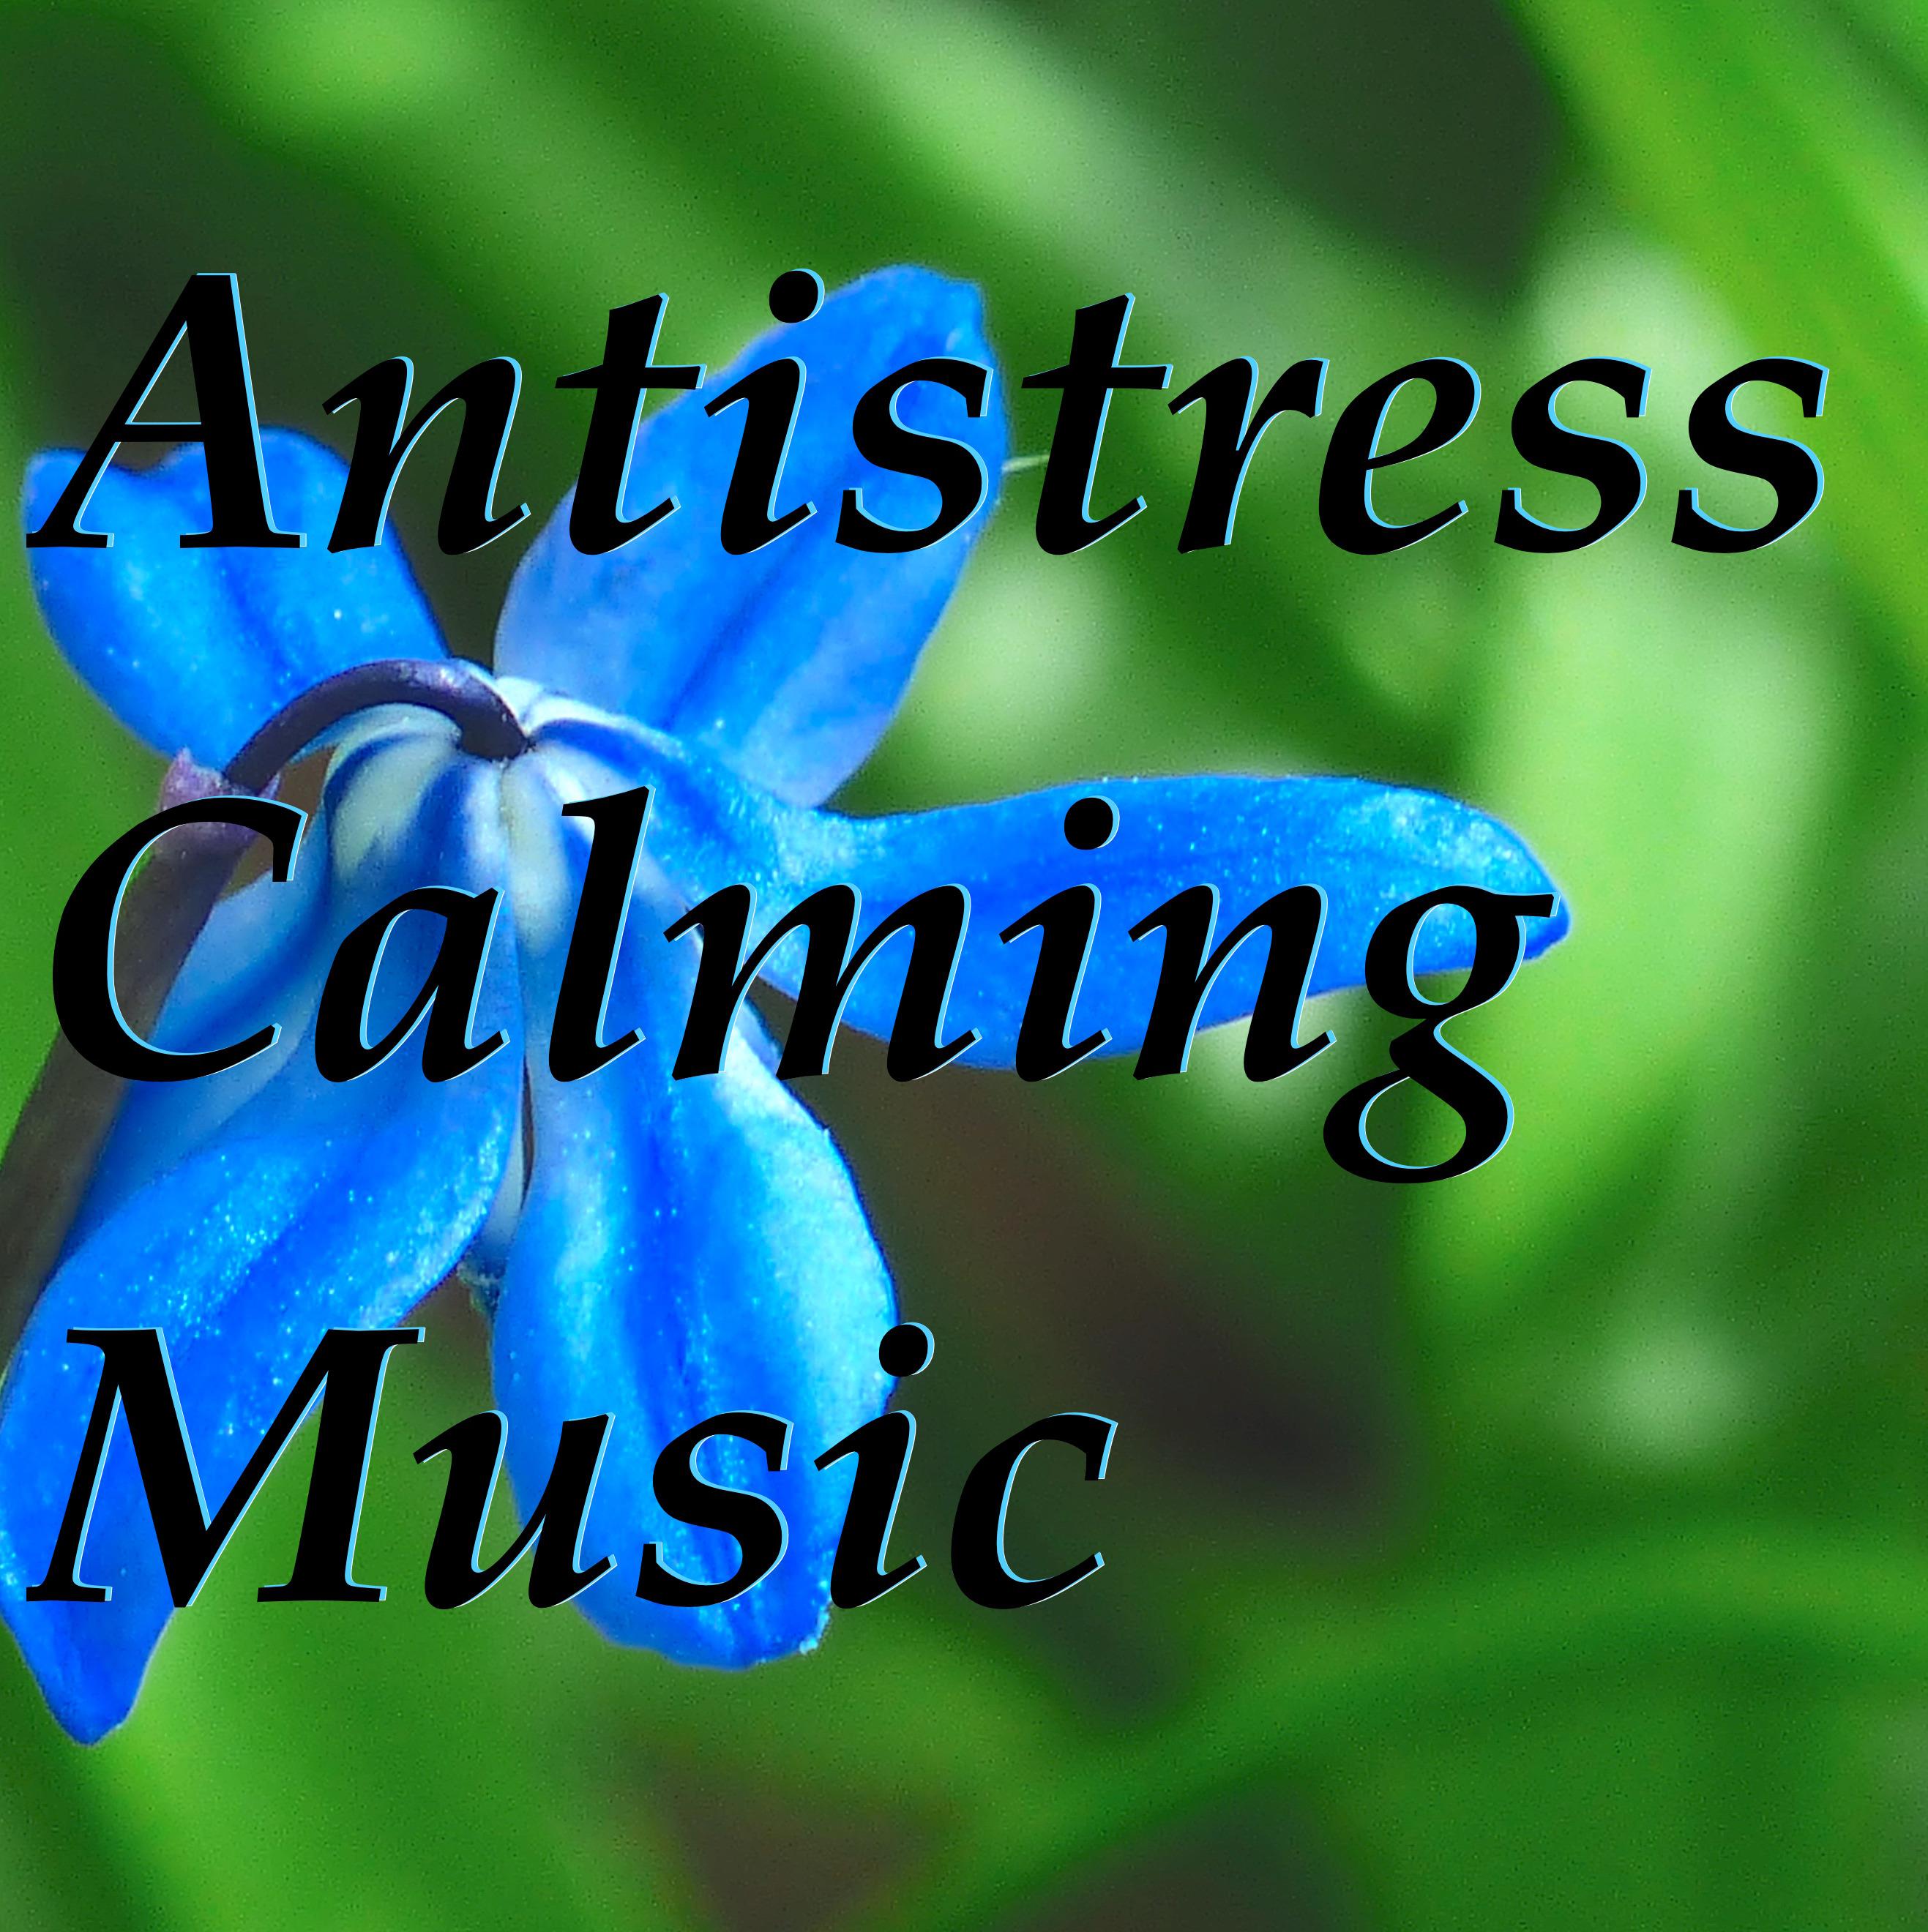 Antistress Calming Music - Yoga Morning Salutation Stress, Sadness, Anxiety, Depression Relief, Relaxation and Mindfulness Meditation Techniques & Training